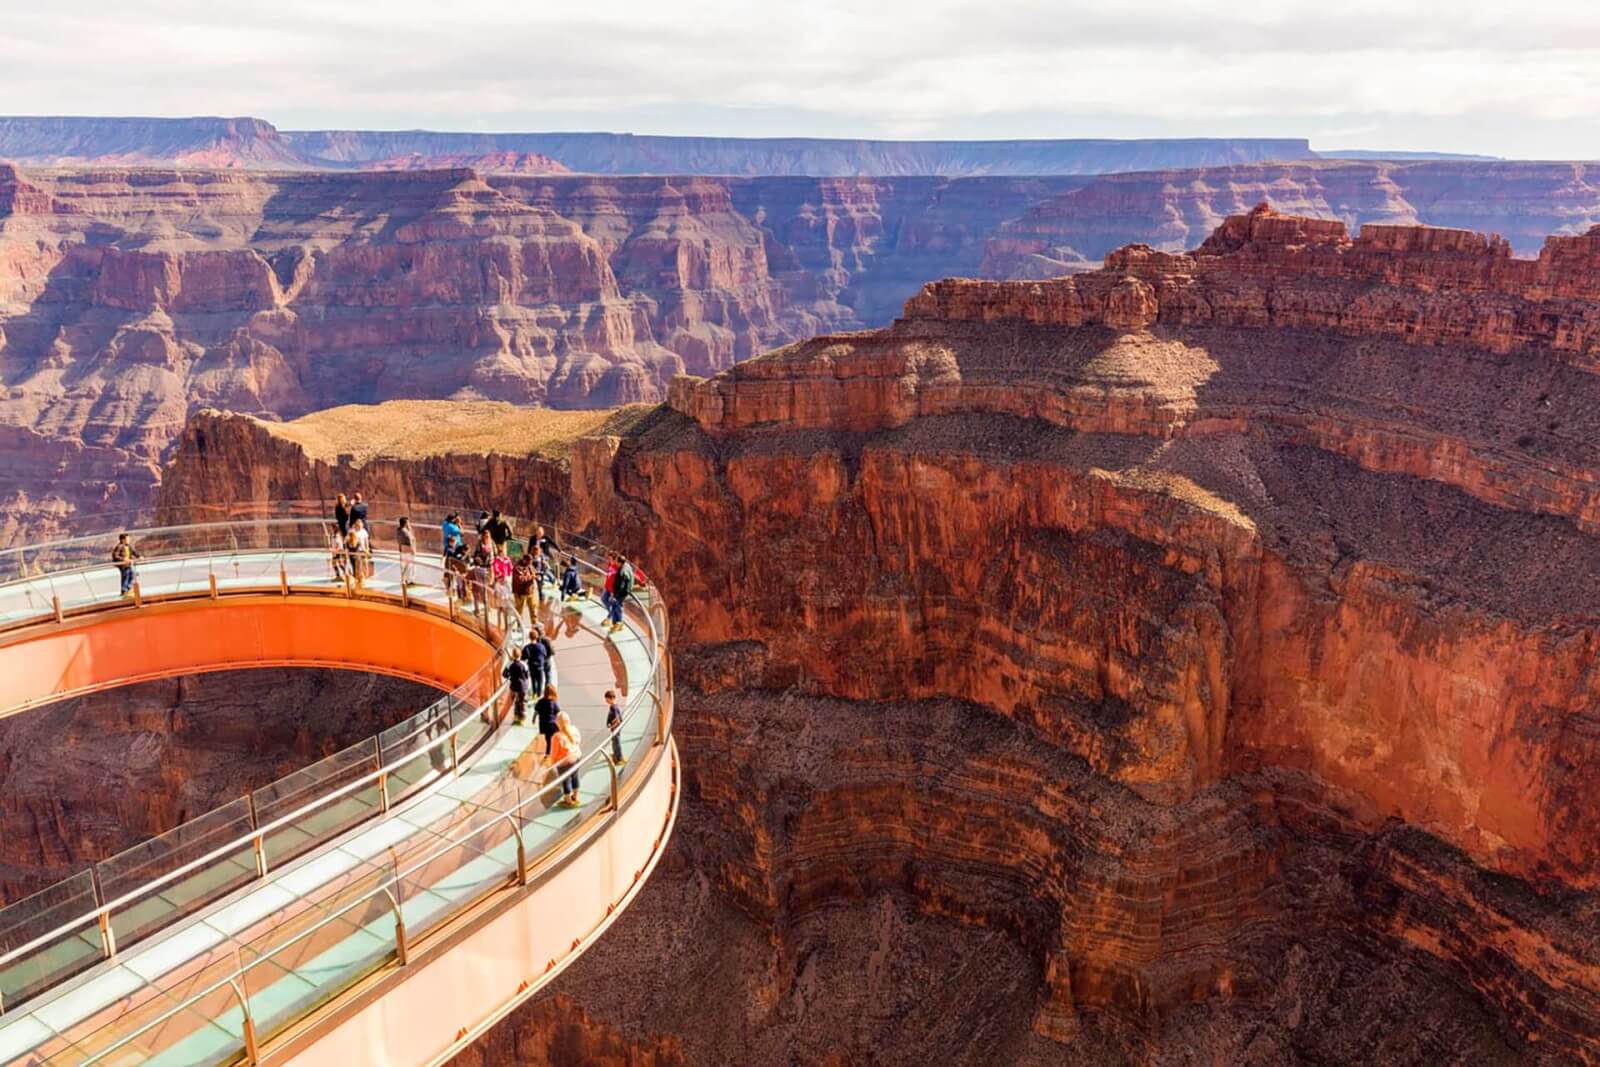 Visit the Grand Canyon - Grand Canyon West